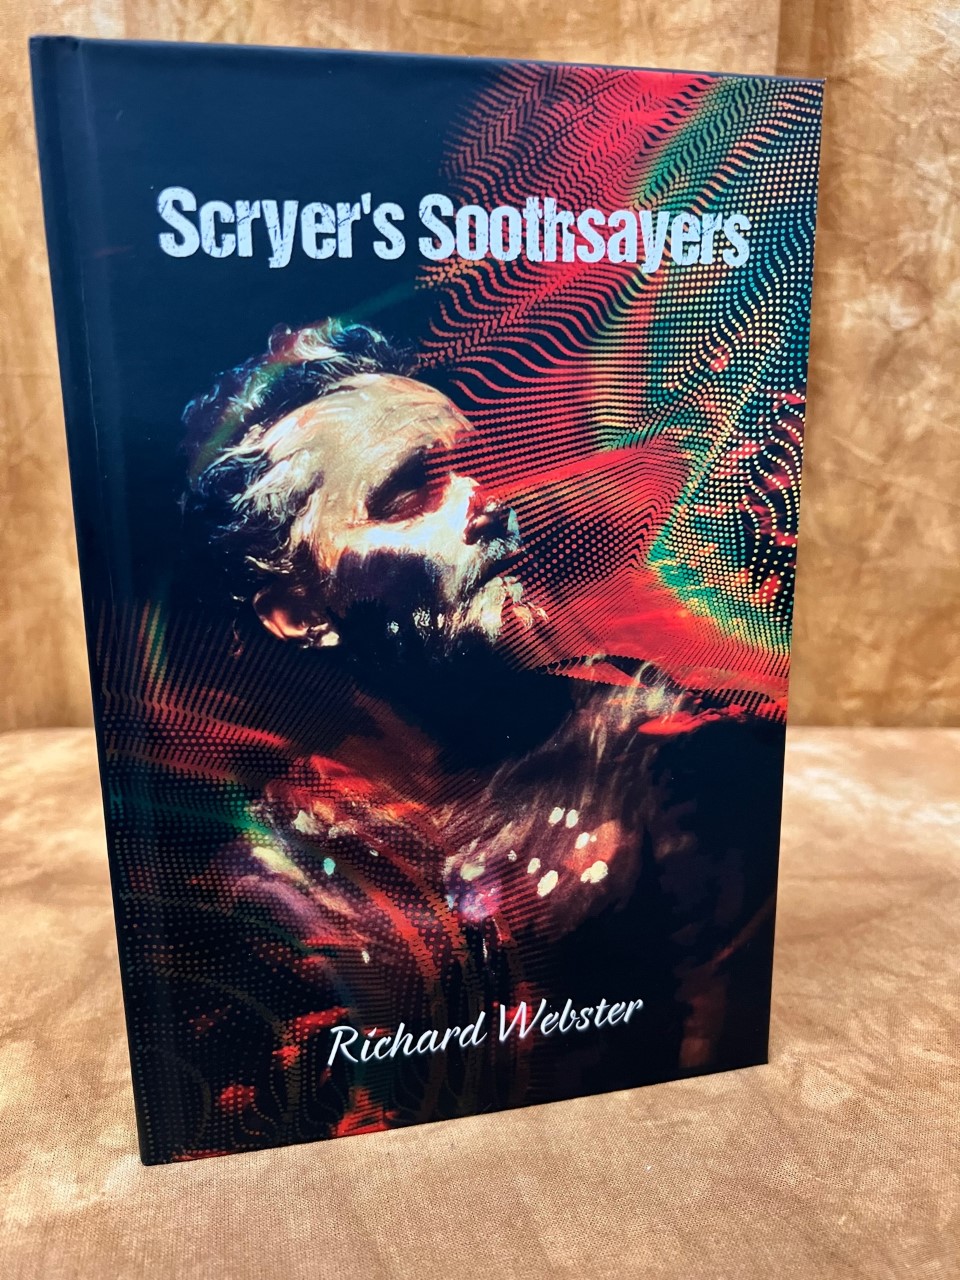 Richard Webster - Scryer's Soothsayers - Neal Scryer